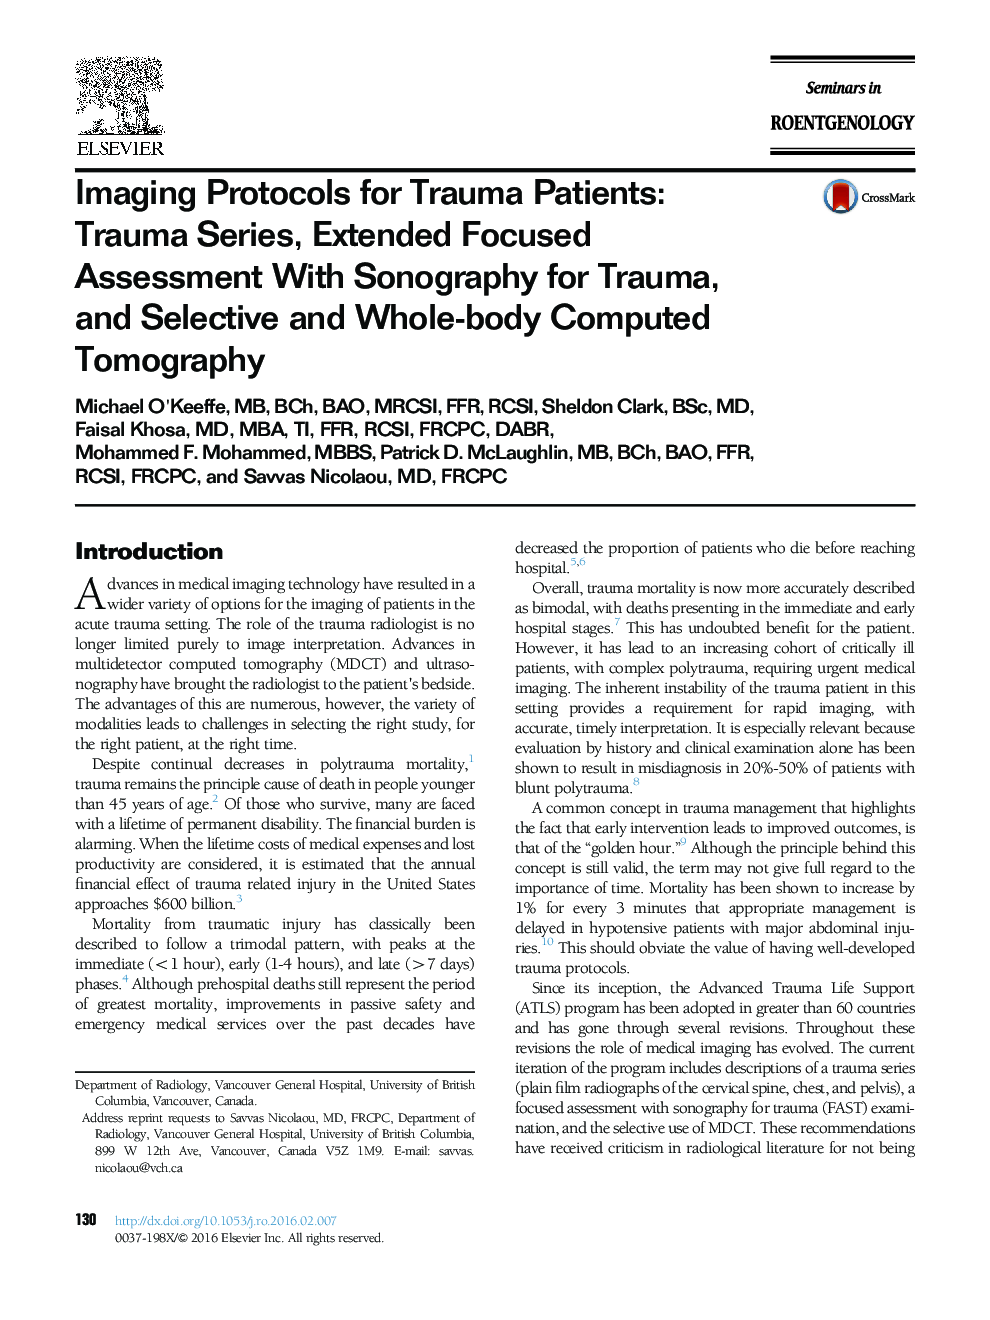 Imaging Protocols for Trauma Patients: Trauma Series, Extended Focused Assessment With Sonography for Trauma, and Selective and Whole-body Computed Tomography